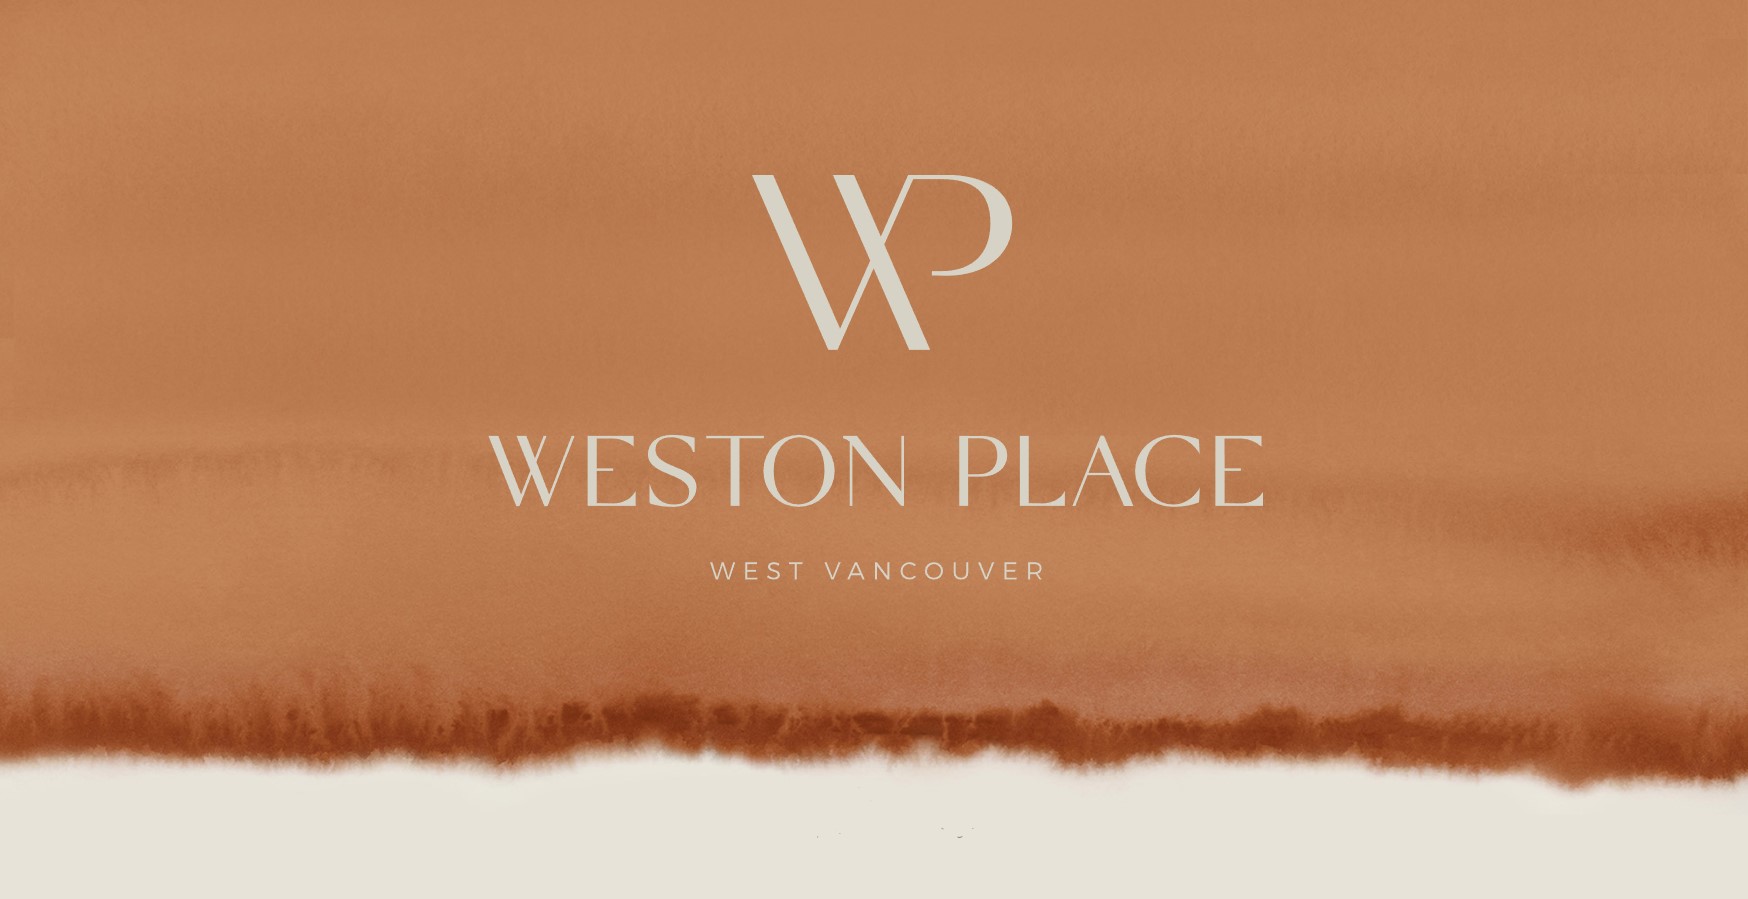 Weston Place by Darwin Construction – Plans, Availability, Prices